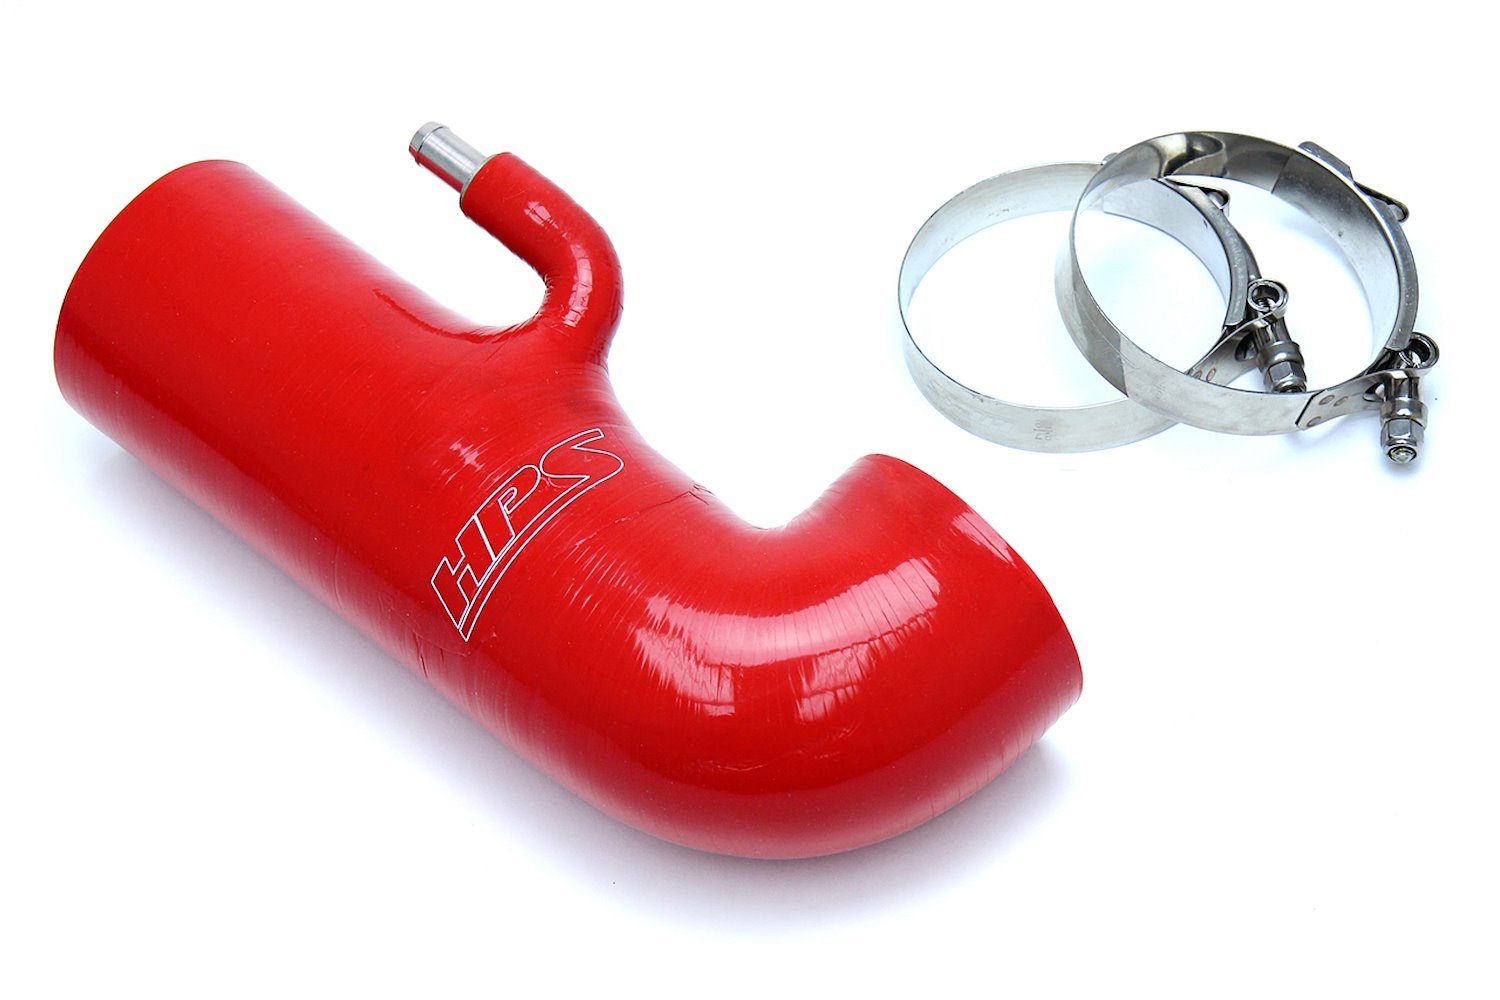 57-1231-RED Silicone Air Intake, Dyno Proven +1.4 HP, +1.2 TQ, High Air Flow, Better Throttle Response